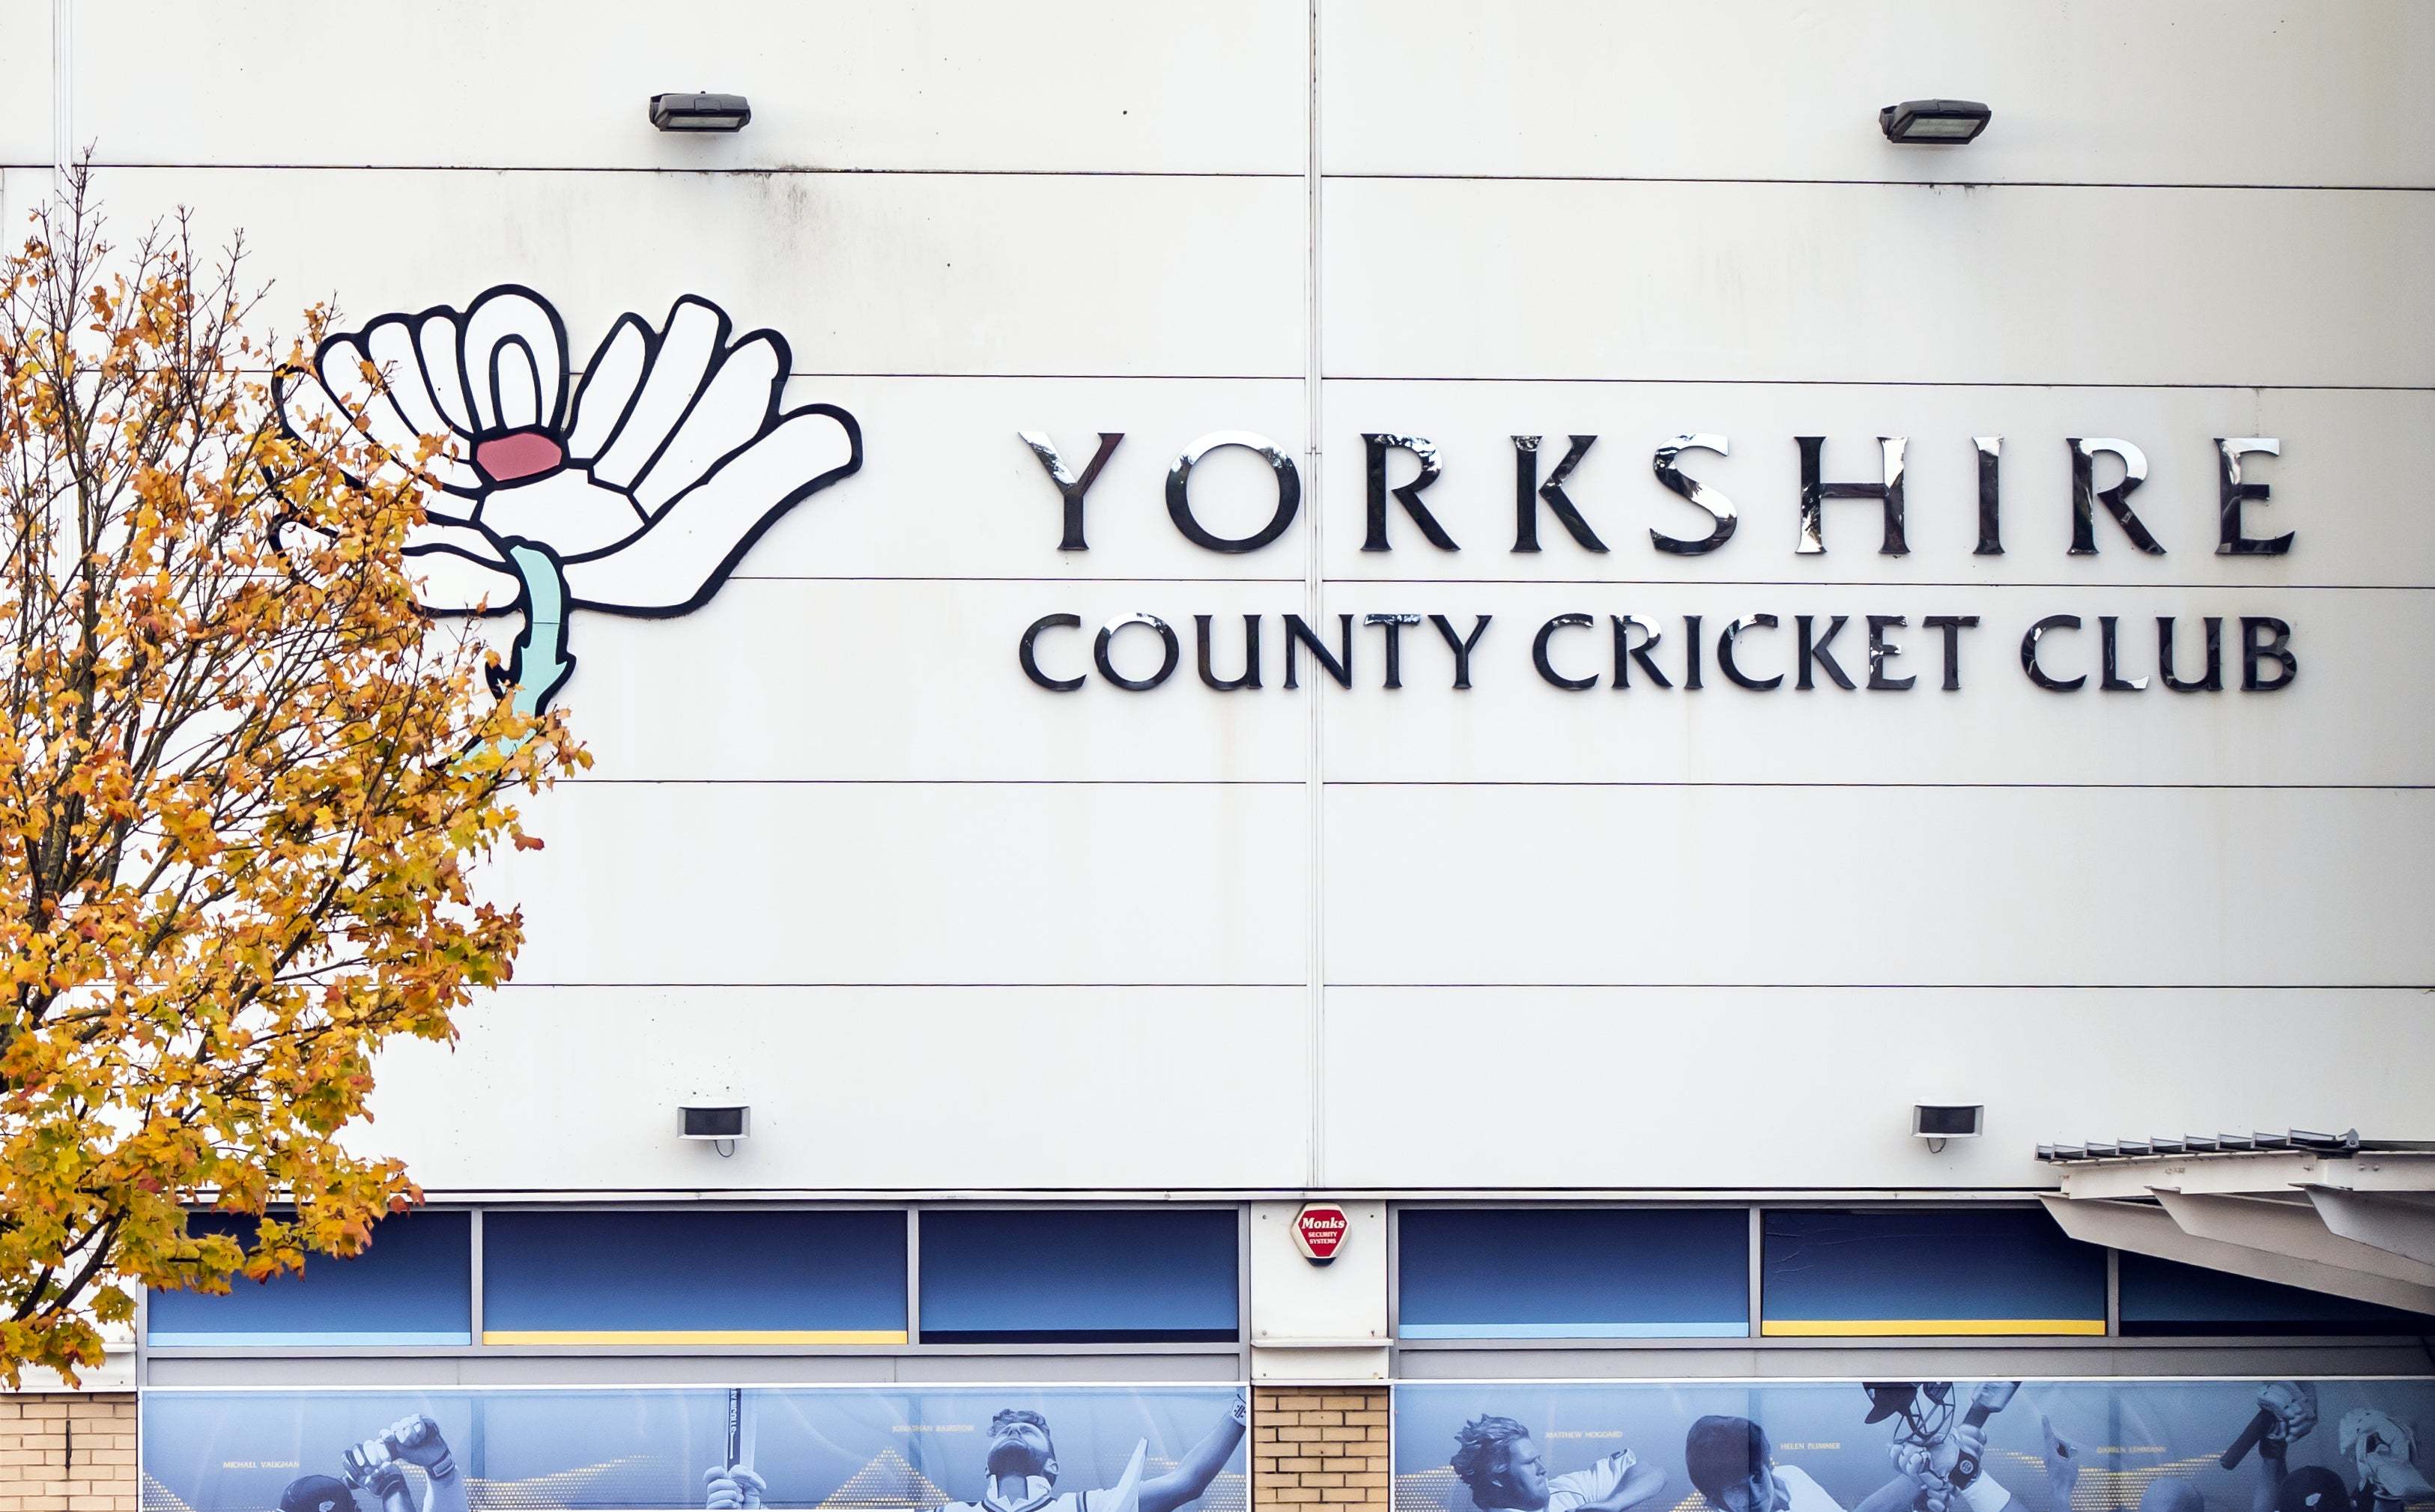 ‘For all the justified anger, it is important not to simply view Yorkshire as a lost cause’